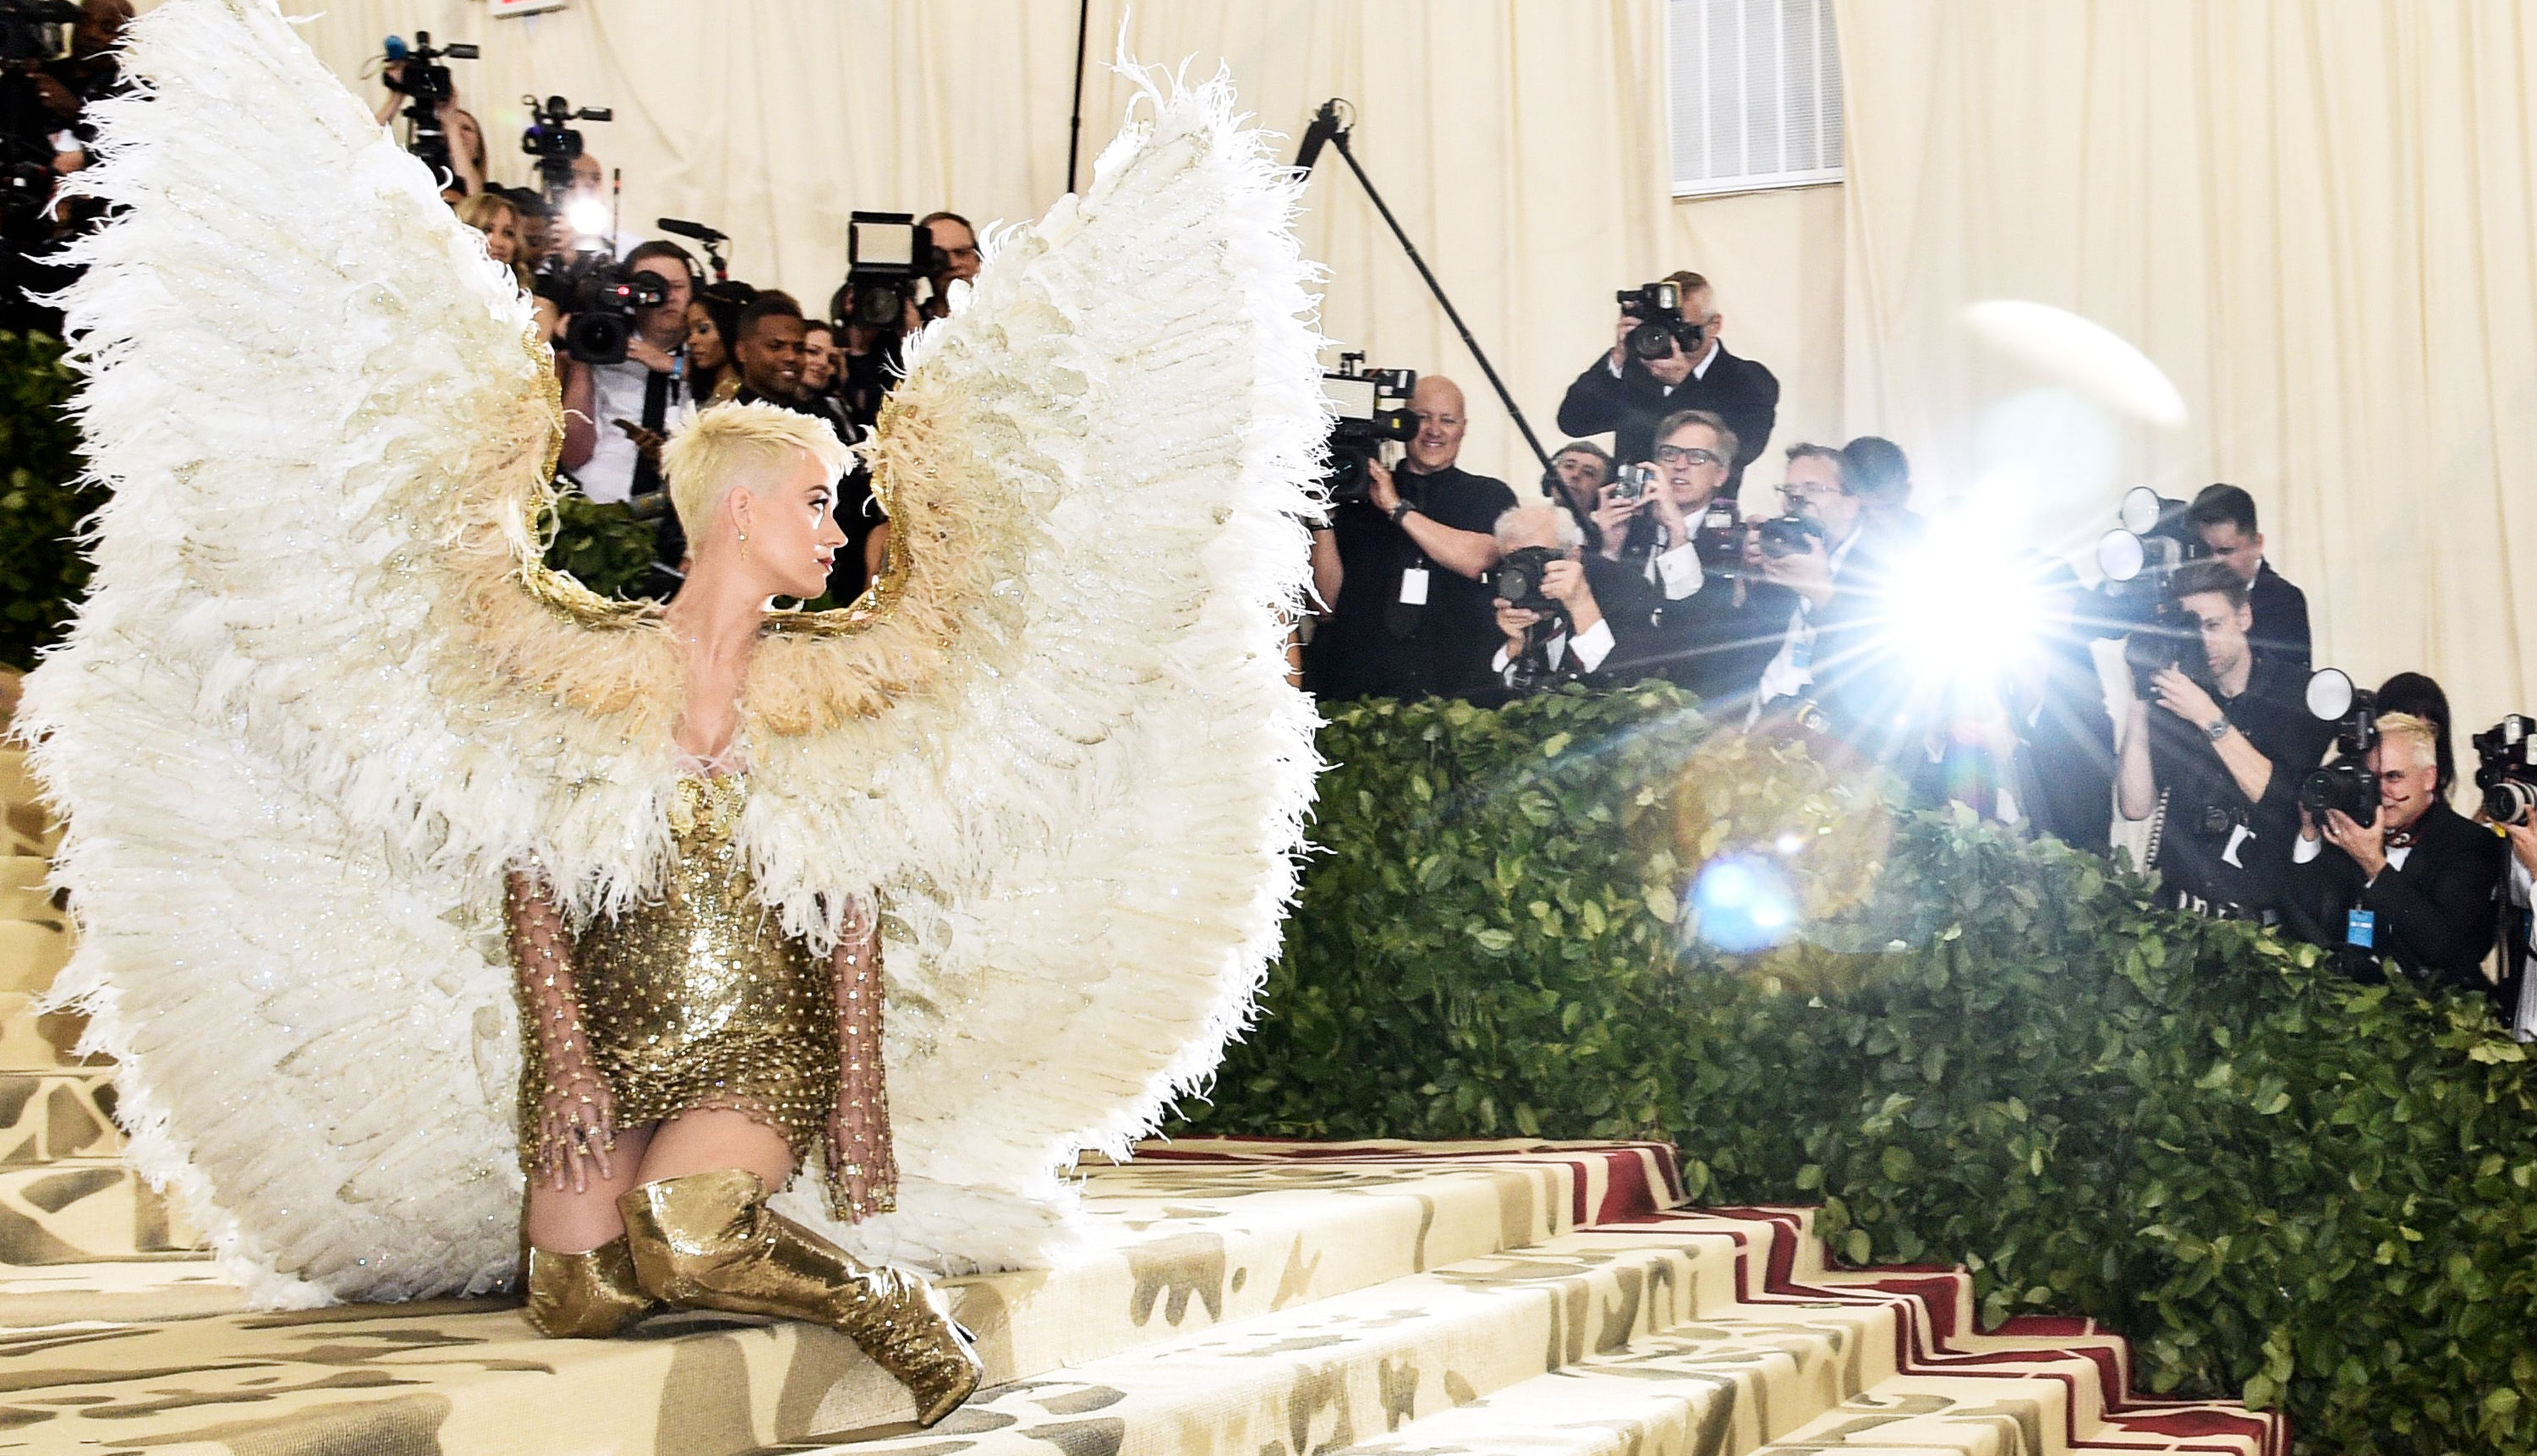 Met Gala 2018: The most spectacular looks at this year’s religious-themed fashion party